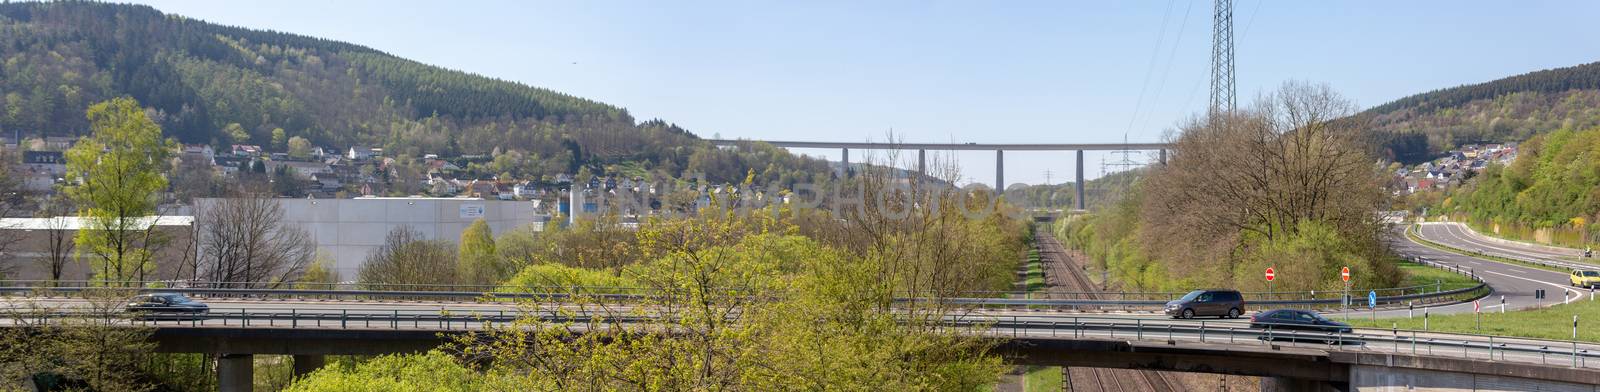 Panorama of the elevated road over a railway line